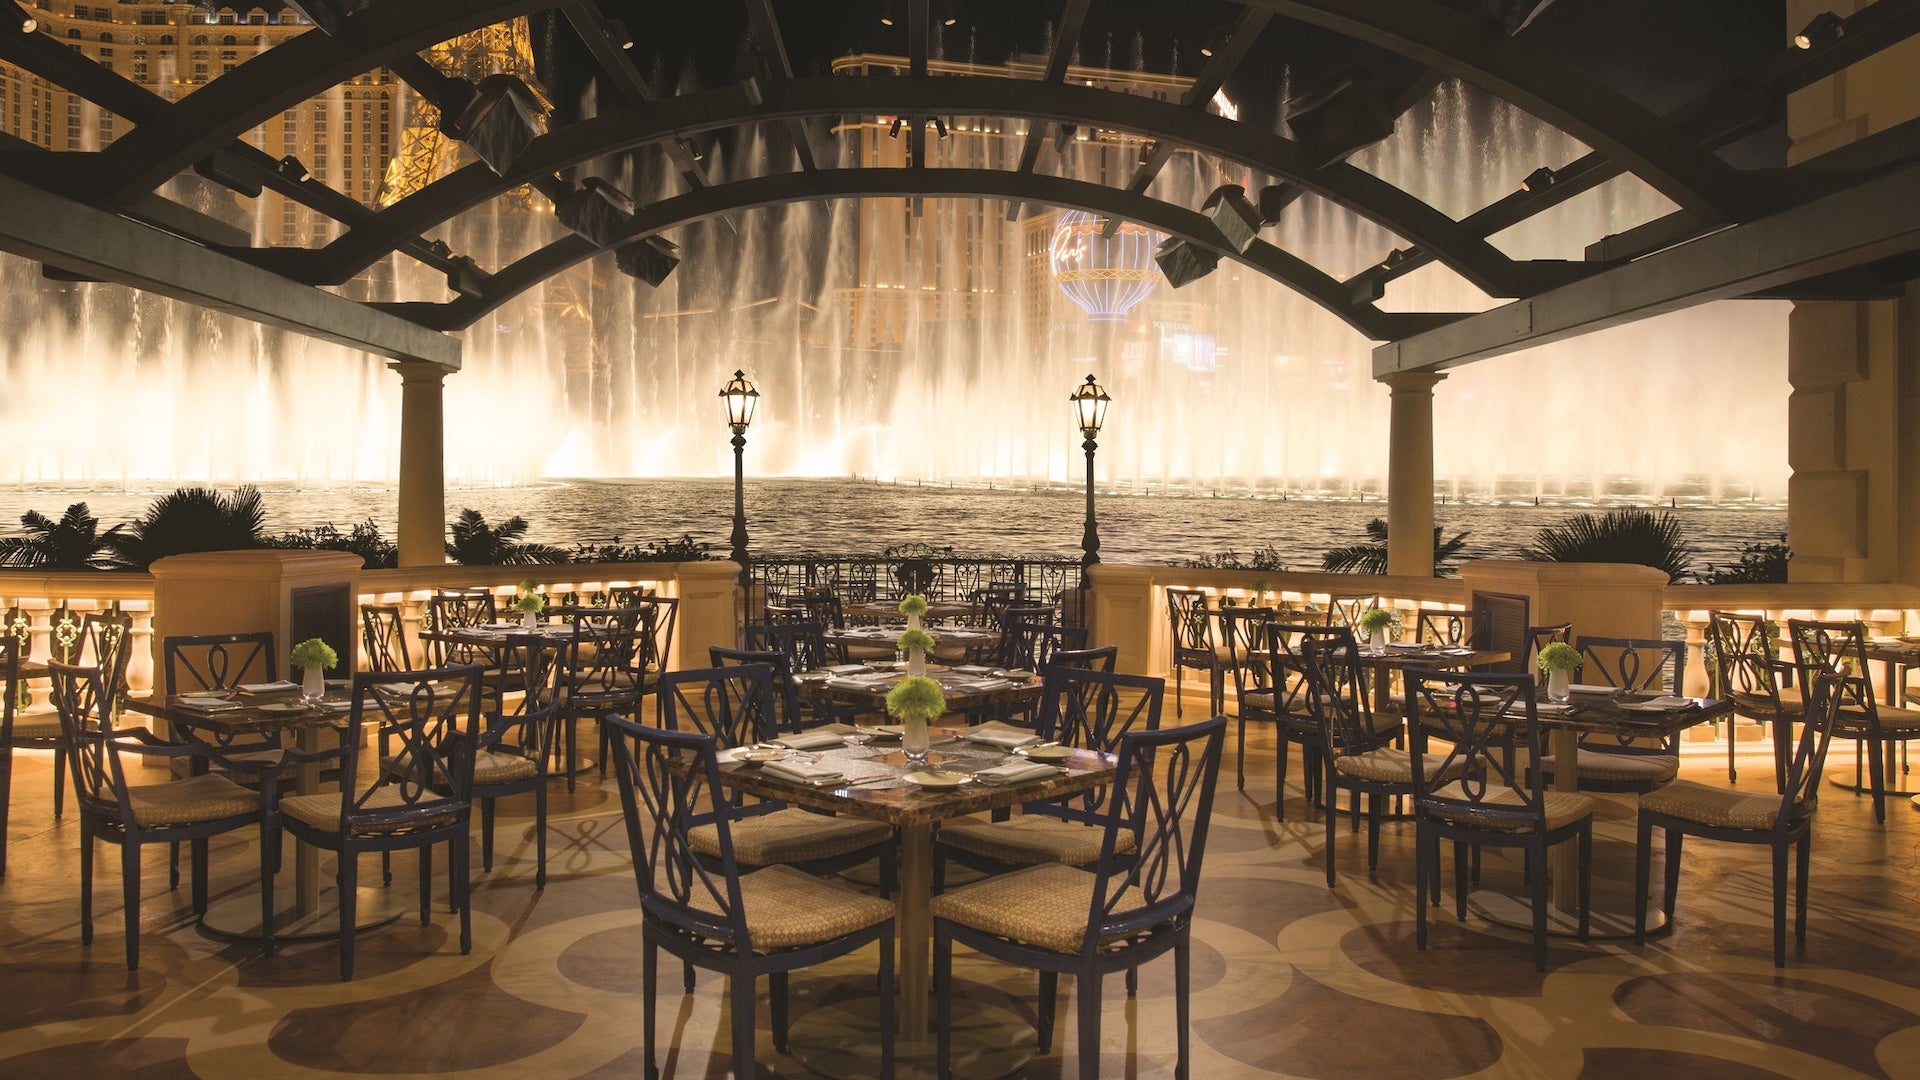 Wide shot of a dining area under an awning with the Bellagio fountains in the background